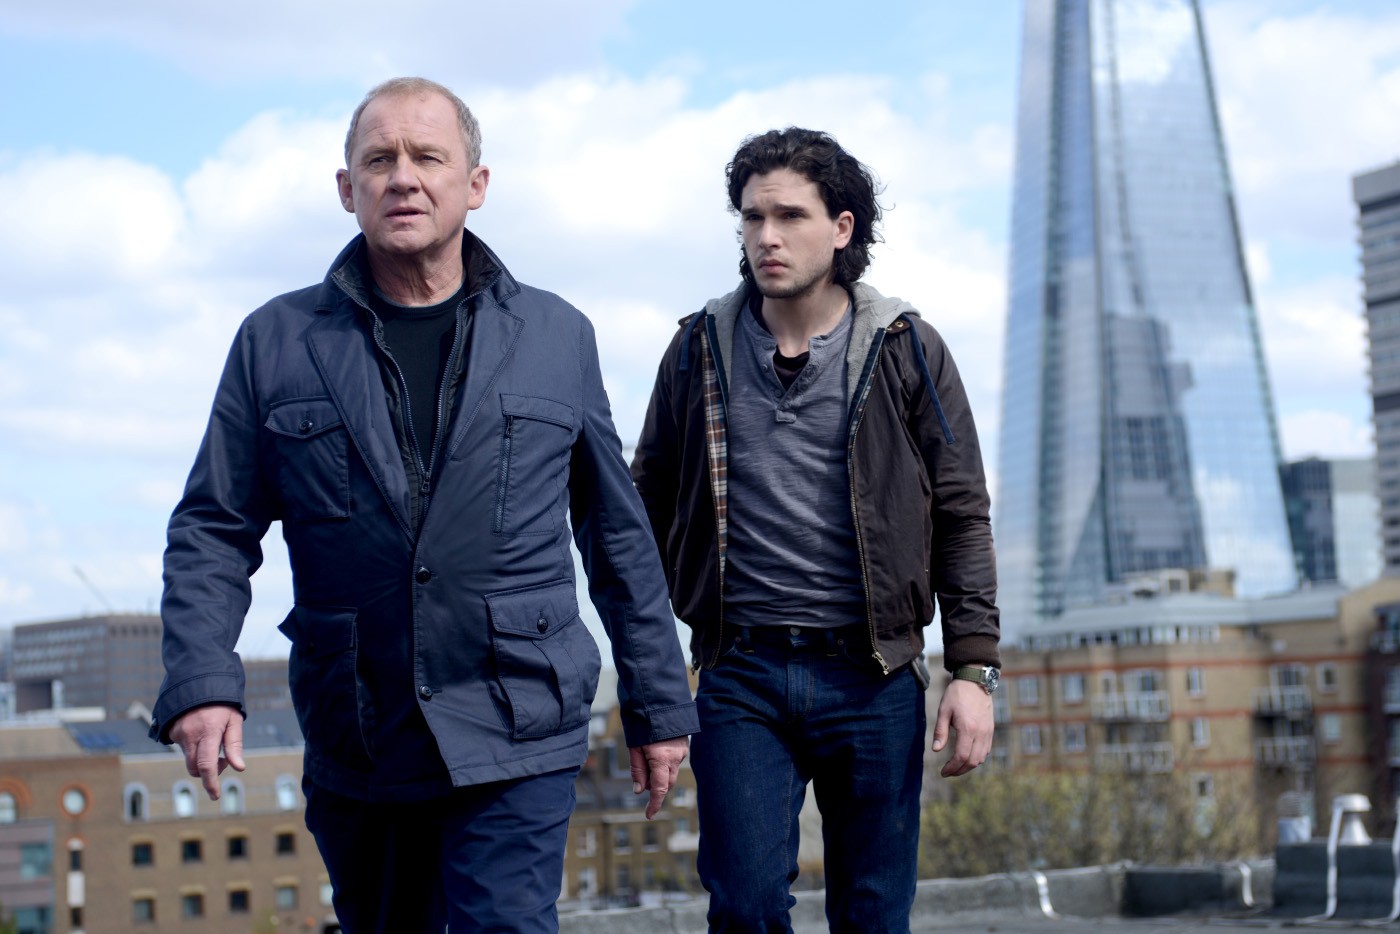 Peter Firth stars as Harry Pearce and Kit Harington stars as Will Holloway in Saban Films' MI-5 (2015)